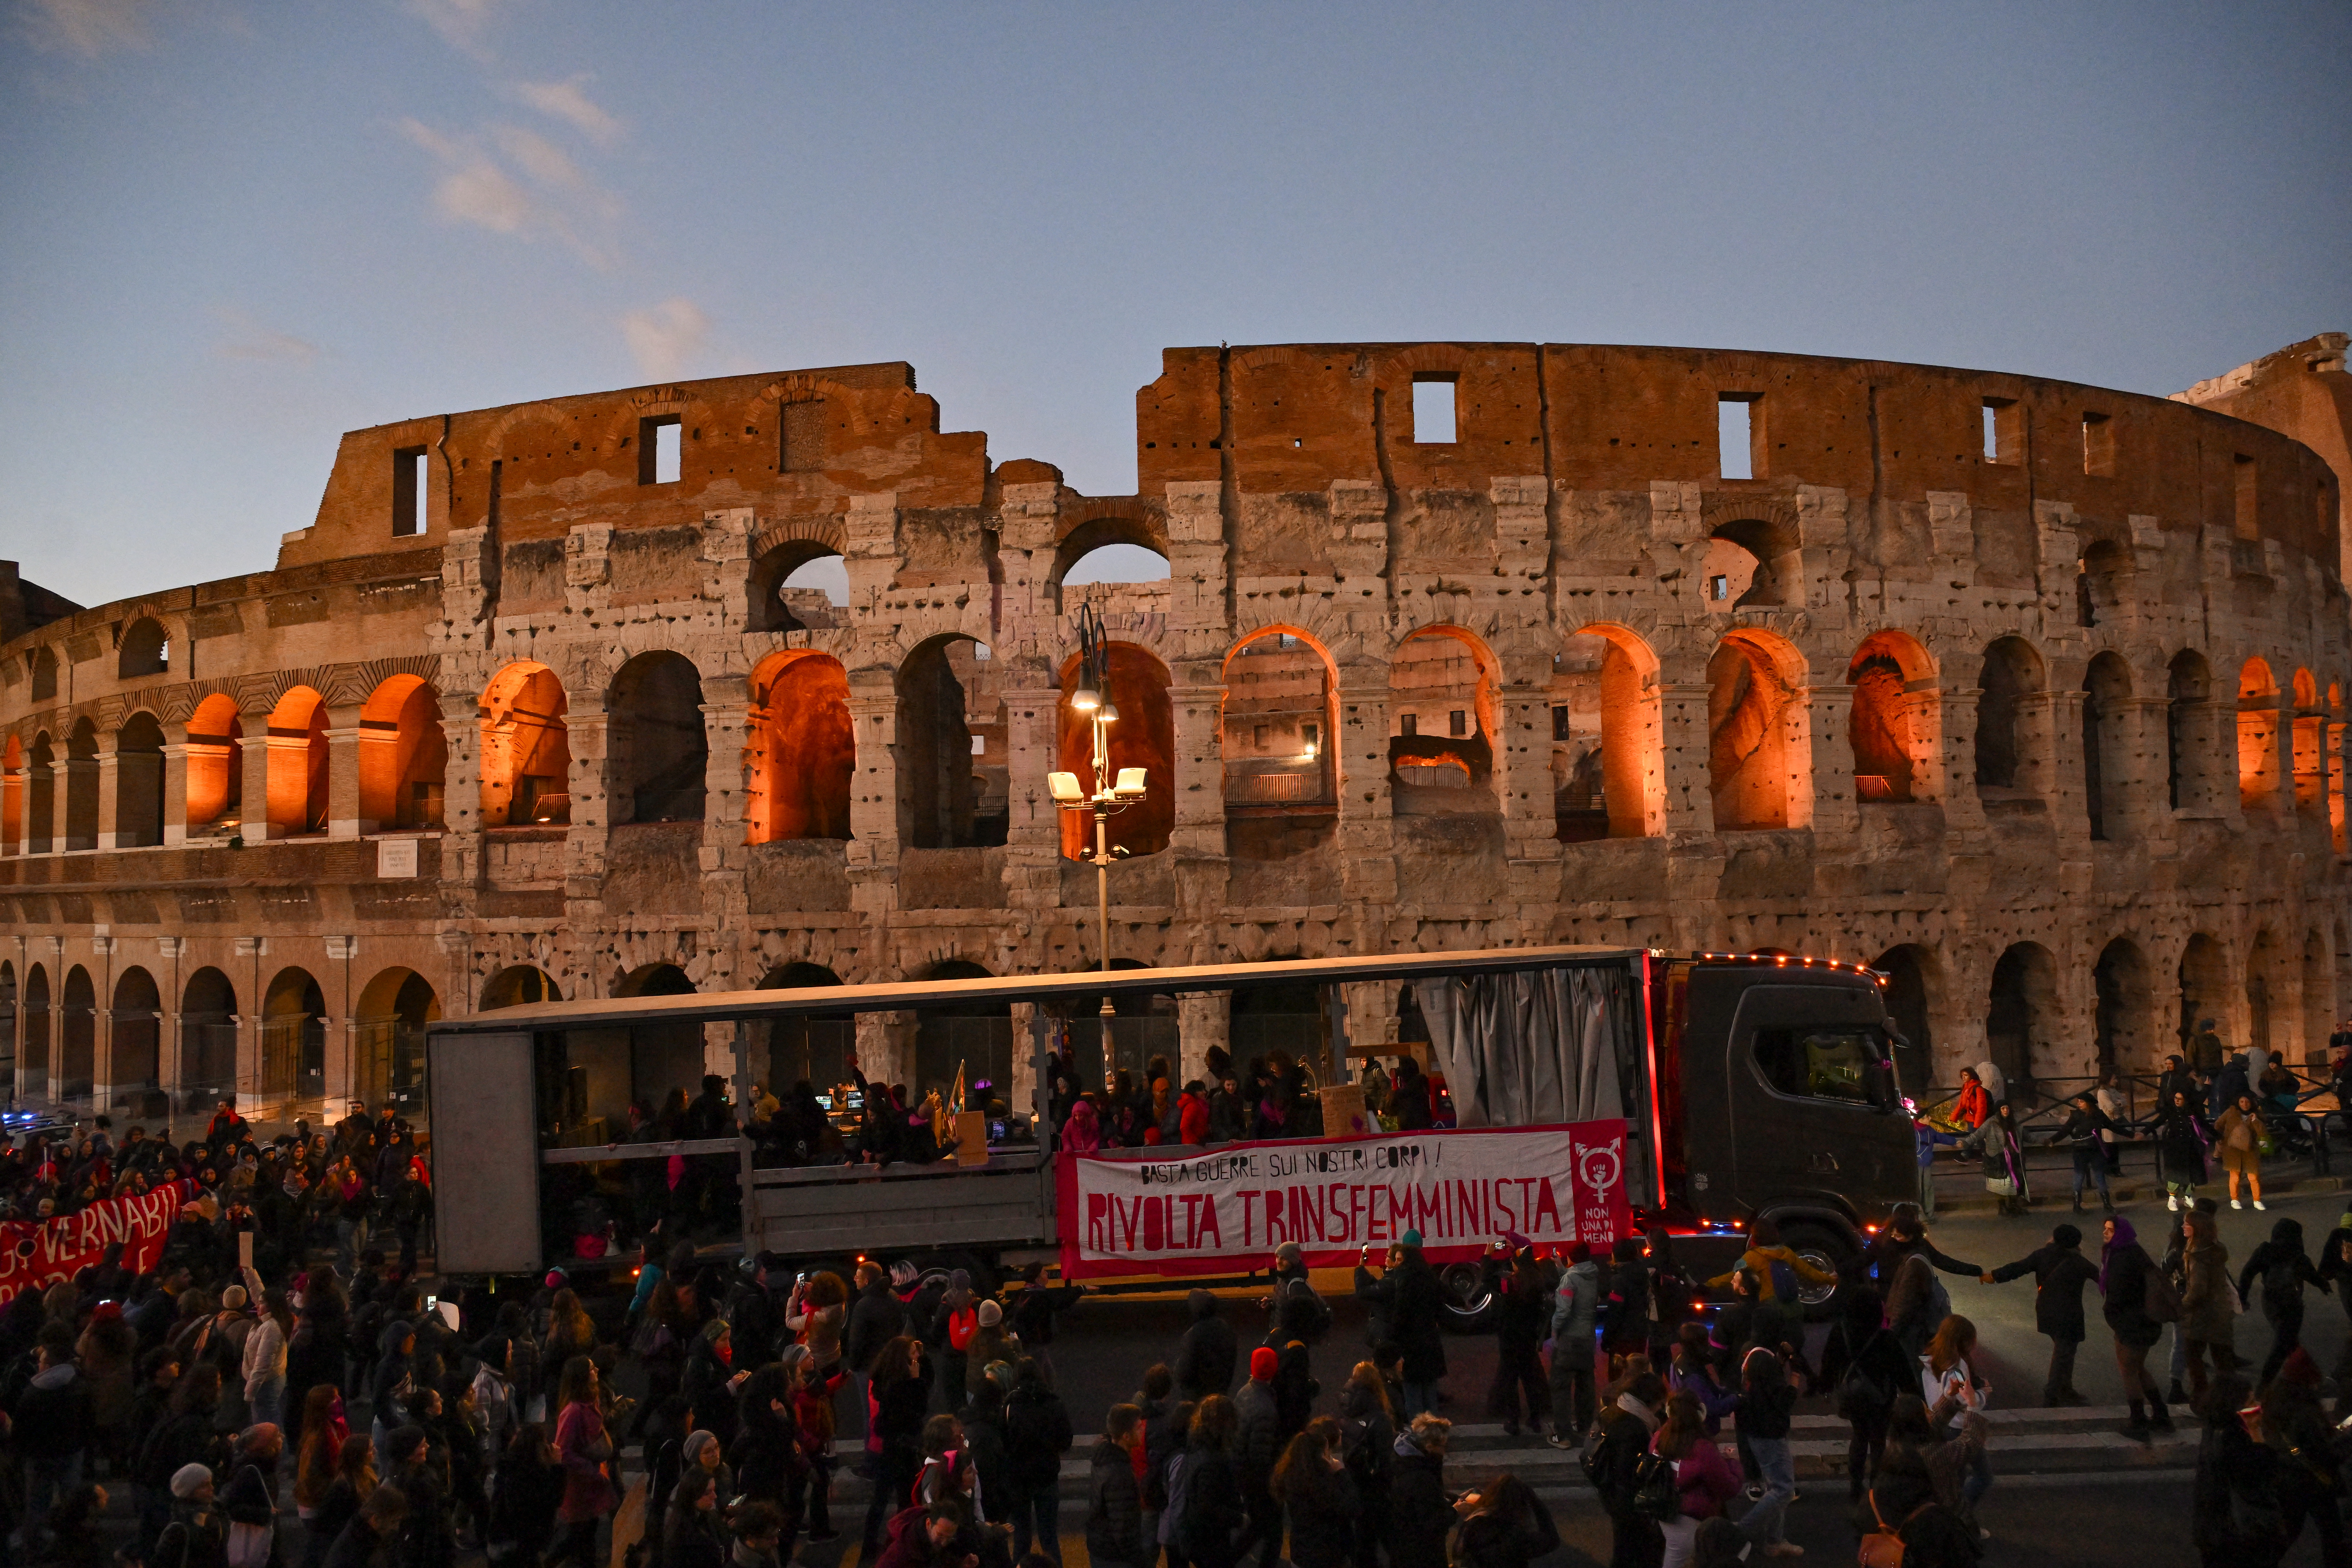 Thousands of people by the Colosseum in Rome, Italy. /Alberto Pizzoli/AFP